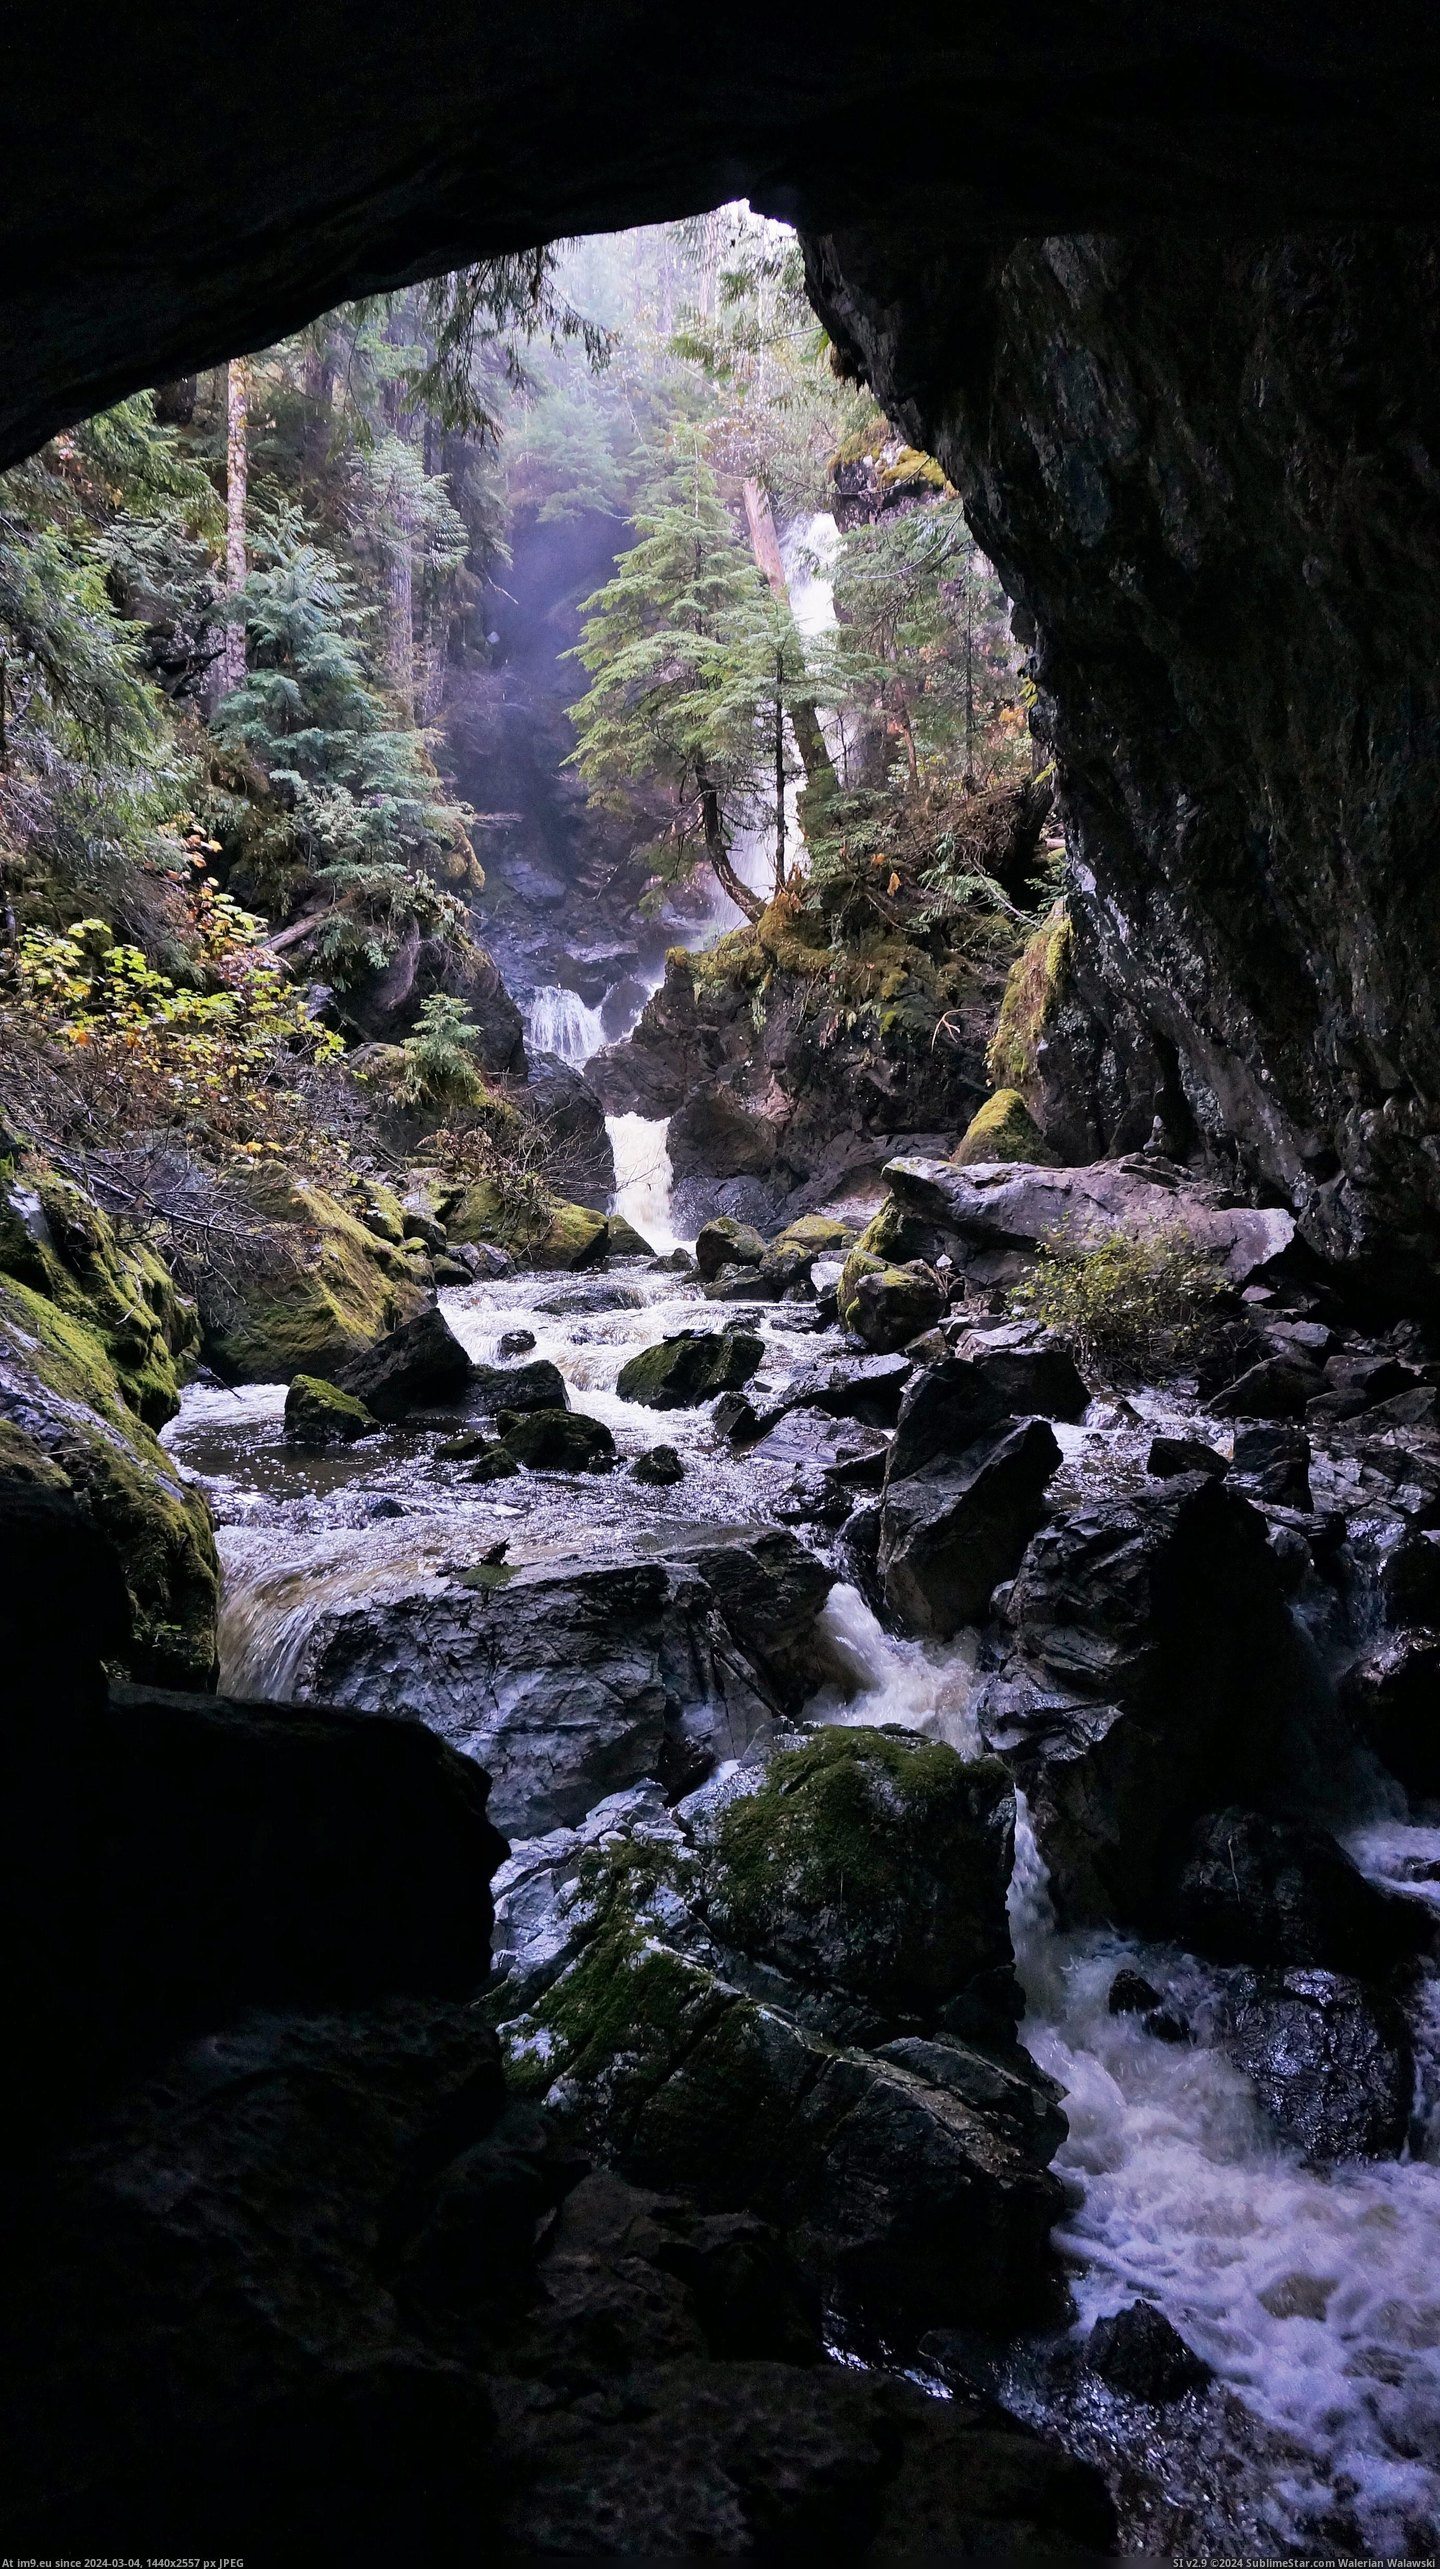 #River #Canada #Entrance #Upana #Gold #Cave [Earthporn] Looking out of the entrance to Upana Cave - Gold River, BC, Canada (OC)(2760x4912) Pic. (Image of album My r/EARTHPORN favs))